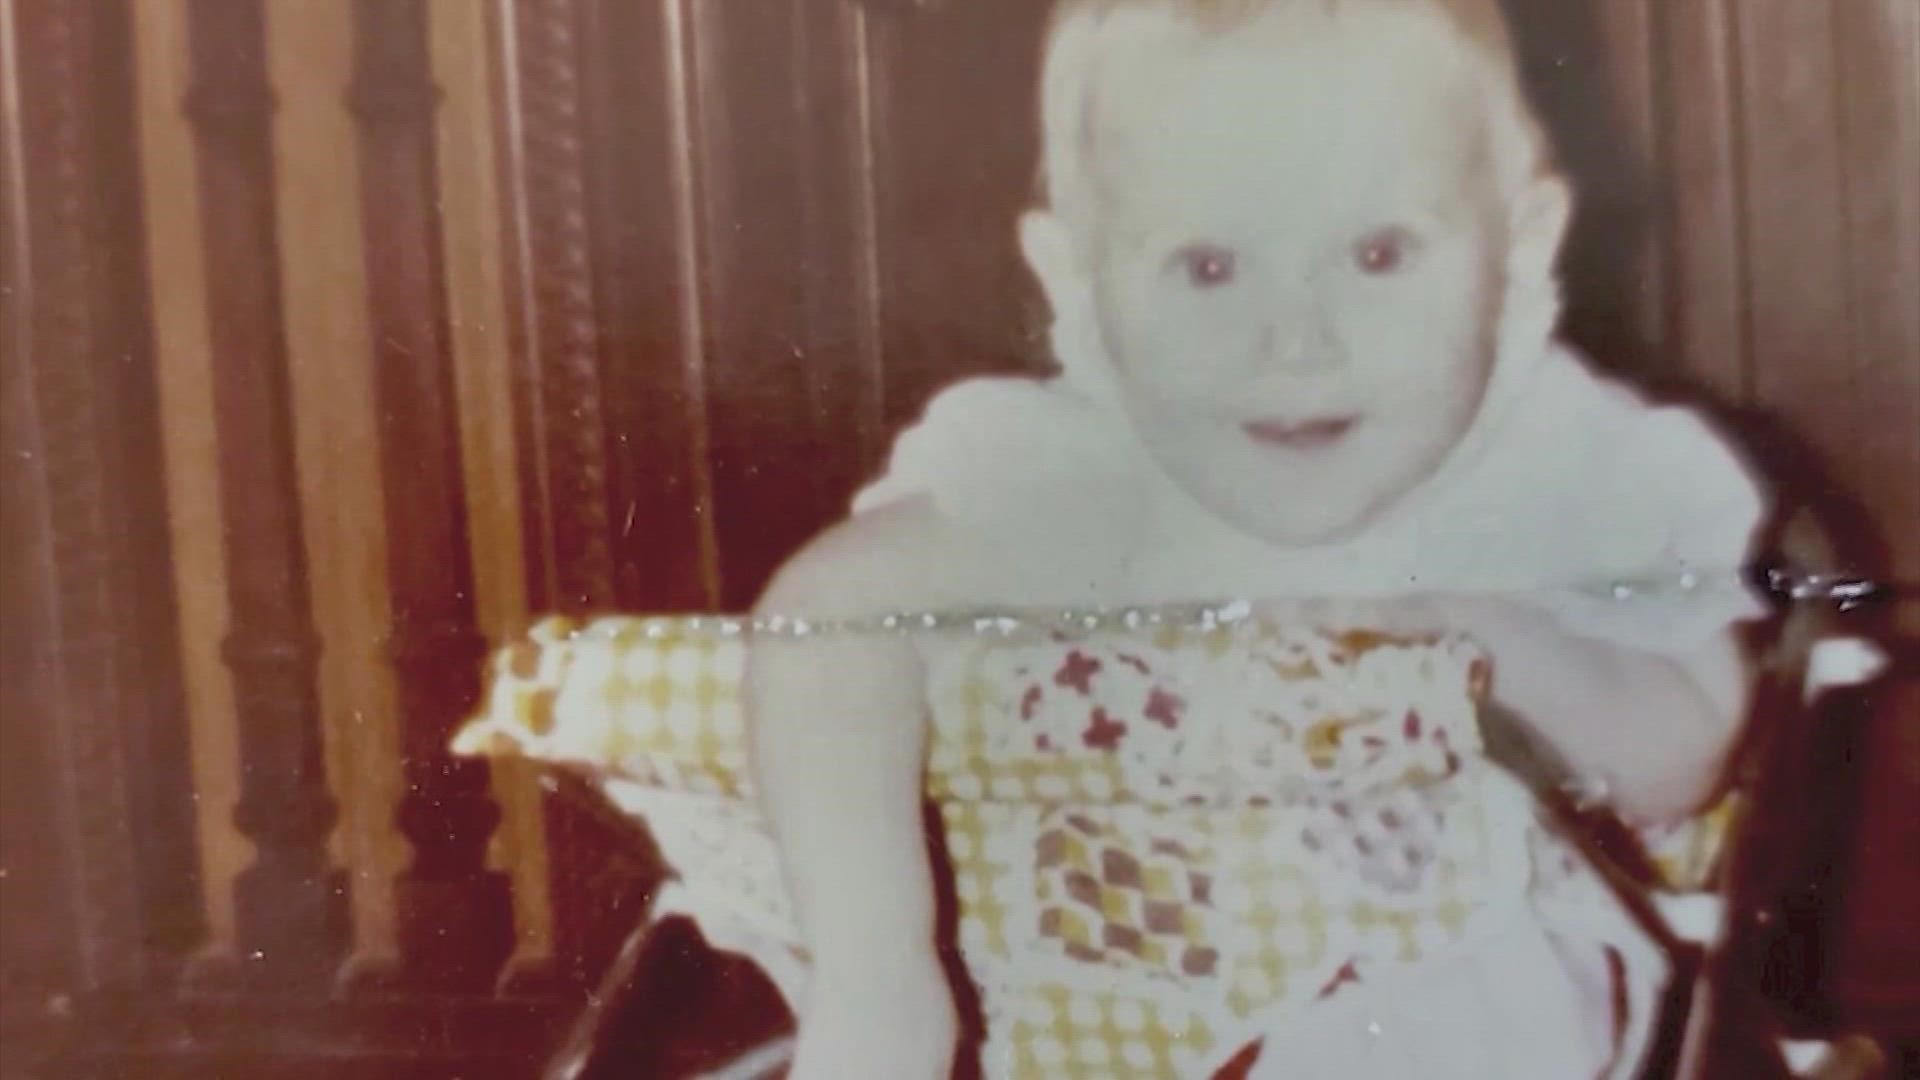 A 4-year-old mystery is finally solved. "Baby Holly Marie" has been found more than 40 years after her parents were killed but their murder still remains a mystery.